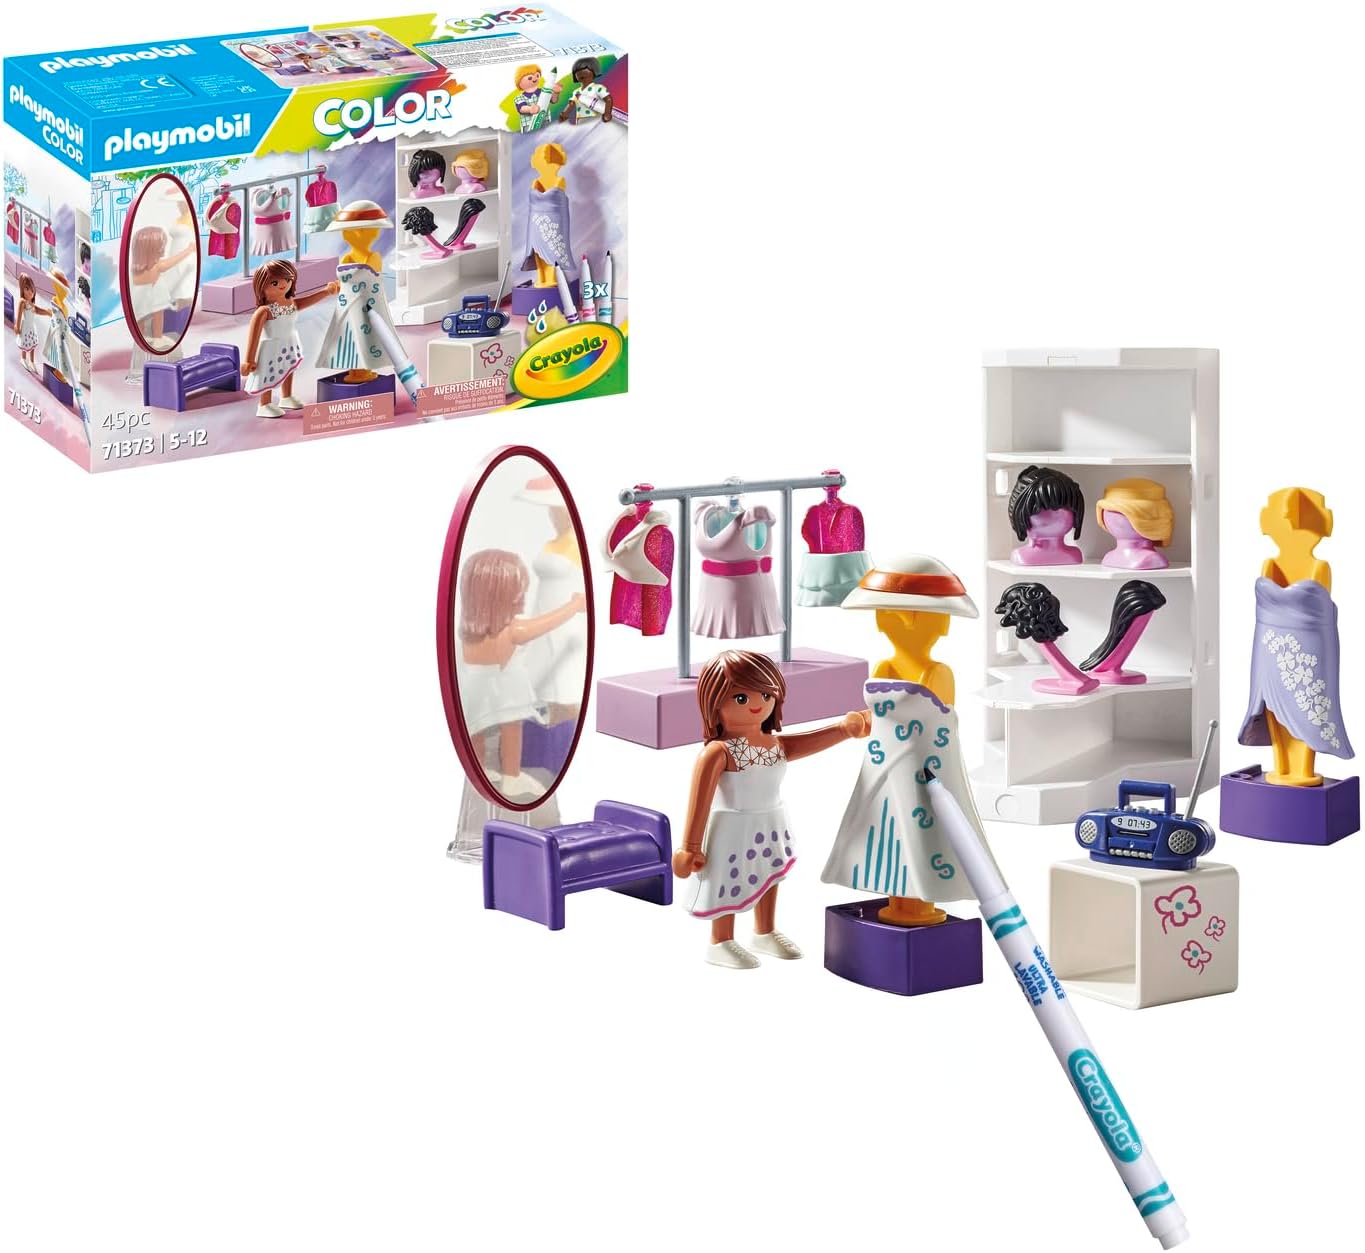 PLAYMOBIL Color 71373 Fashion Design Set, Design for Various Clothing Styles, with Water-soluble Pens, Sponge and Numerous Accessories, Artistic Toy for Children from 5 Years